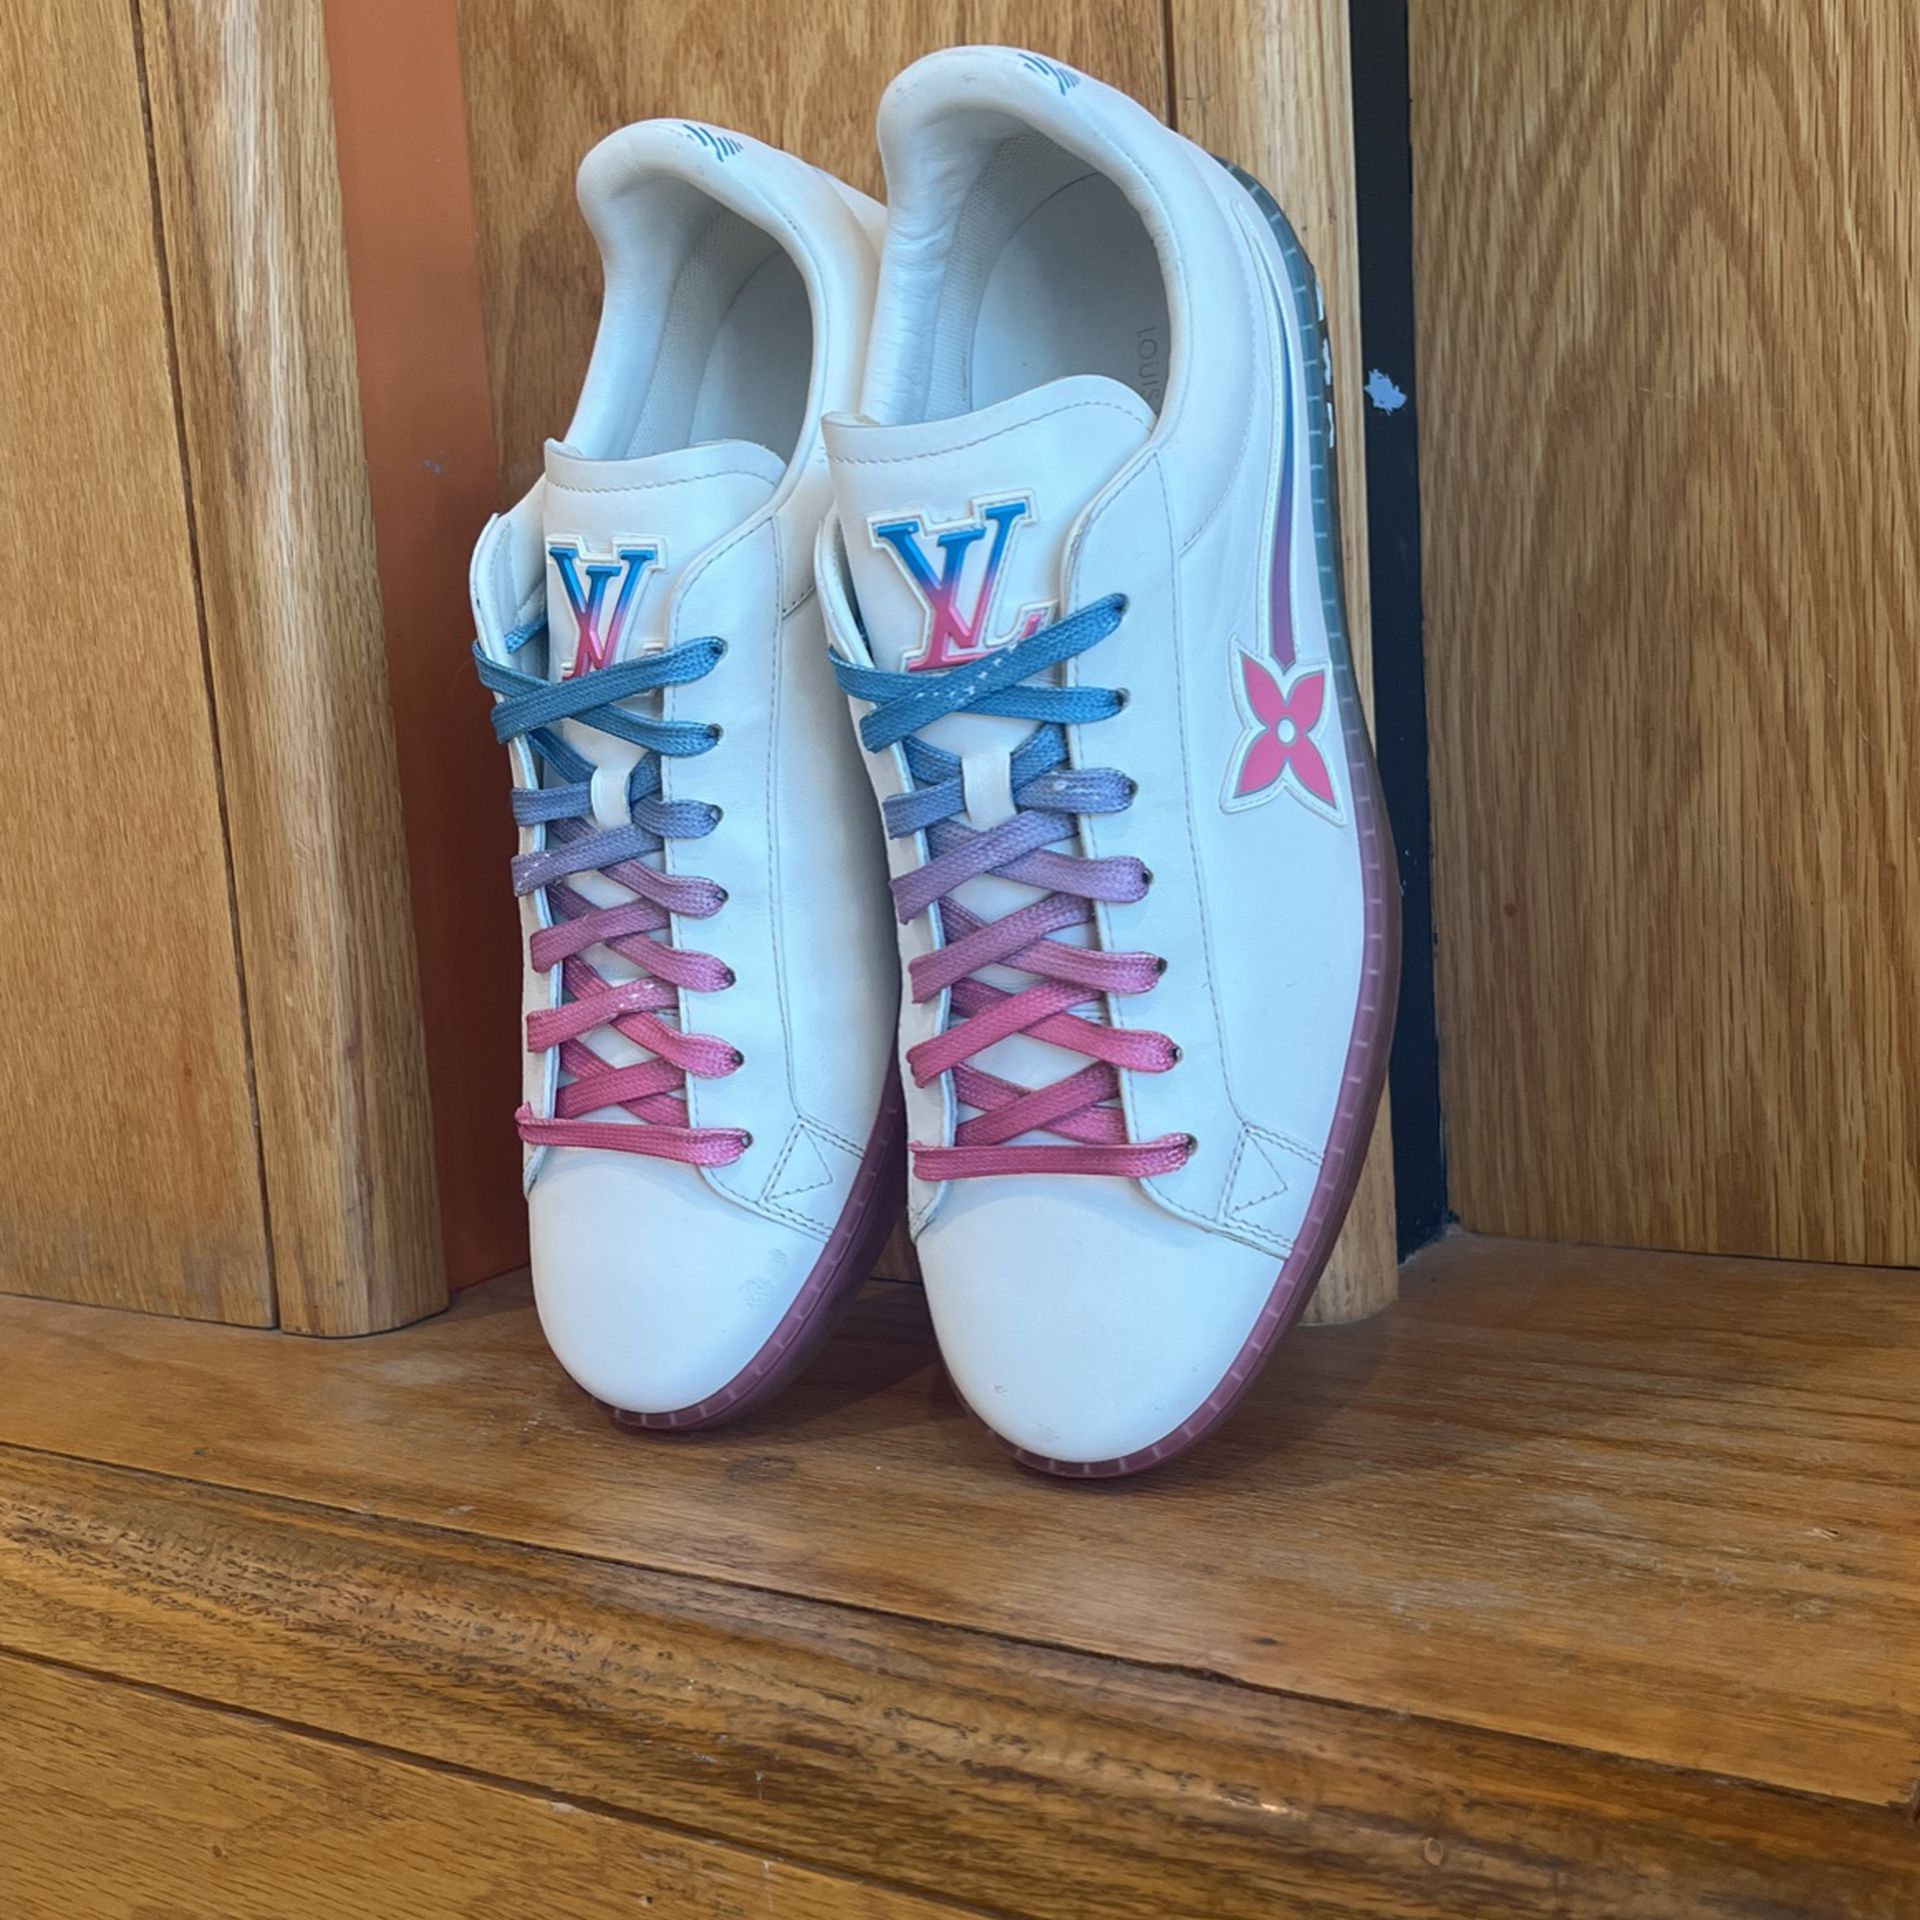 Louis Vuitton Luxembourg Samothrace Sneaker (White Pink Blue)